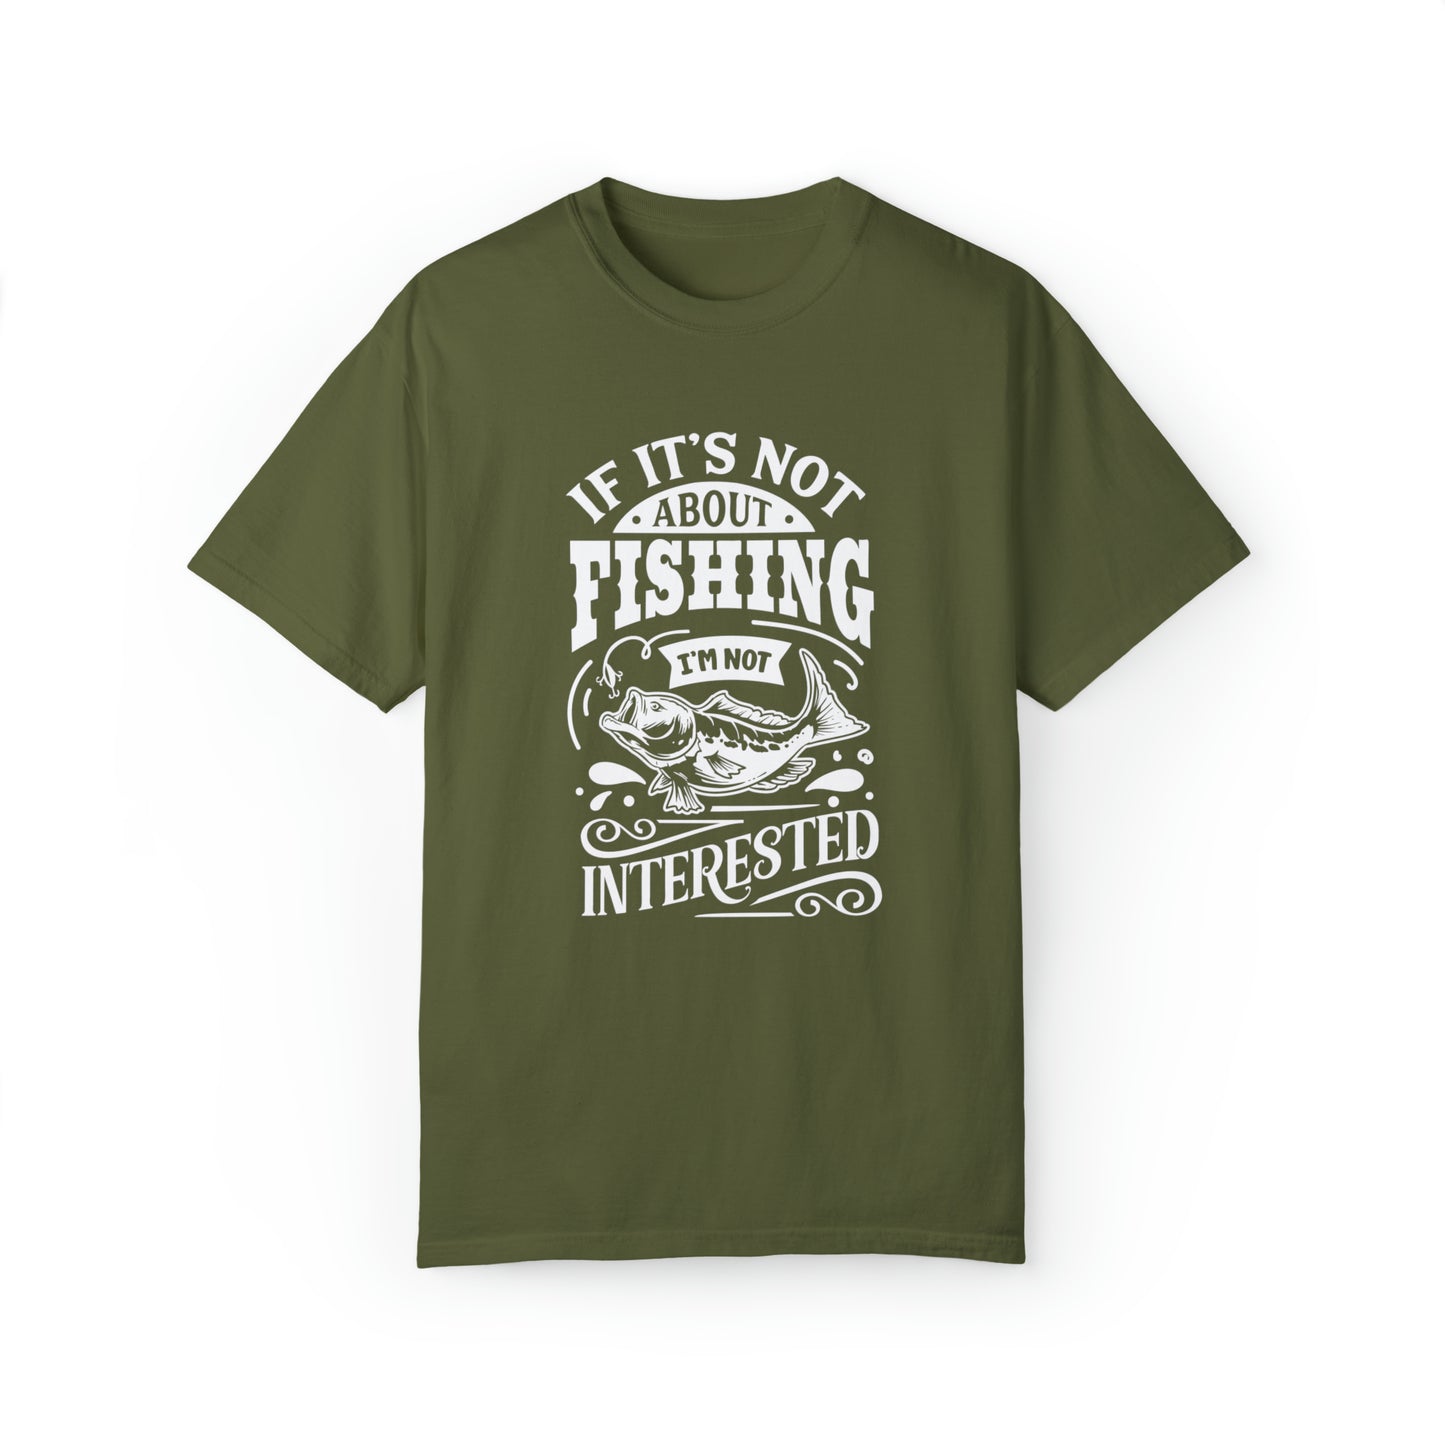 "If It's Not About Fishing, I'm Not Interested" T-shirt